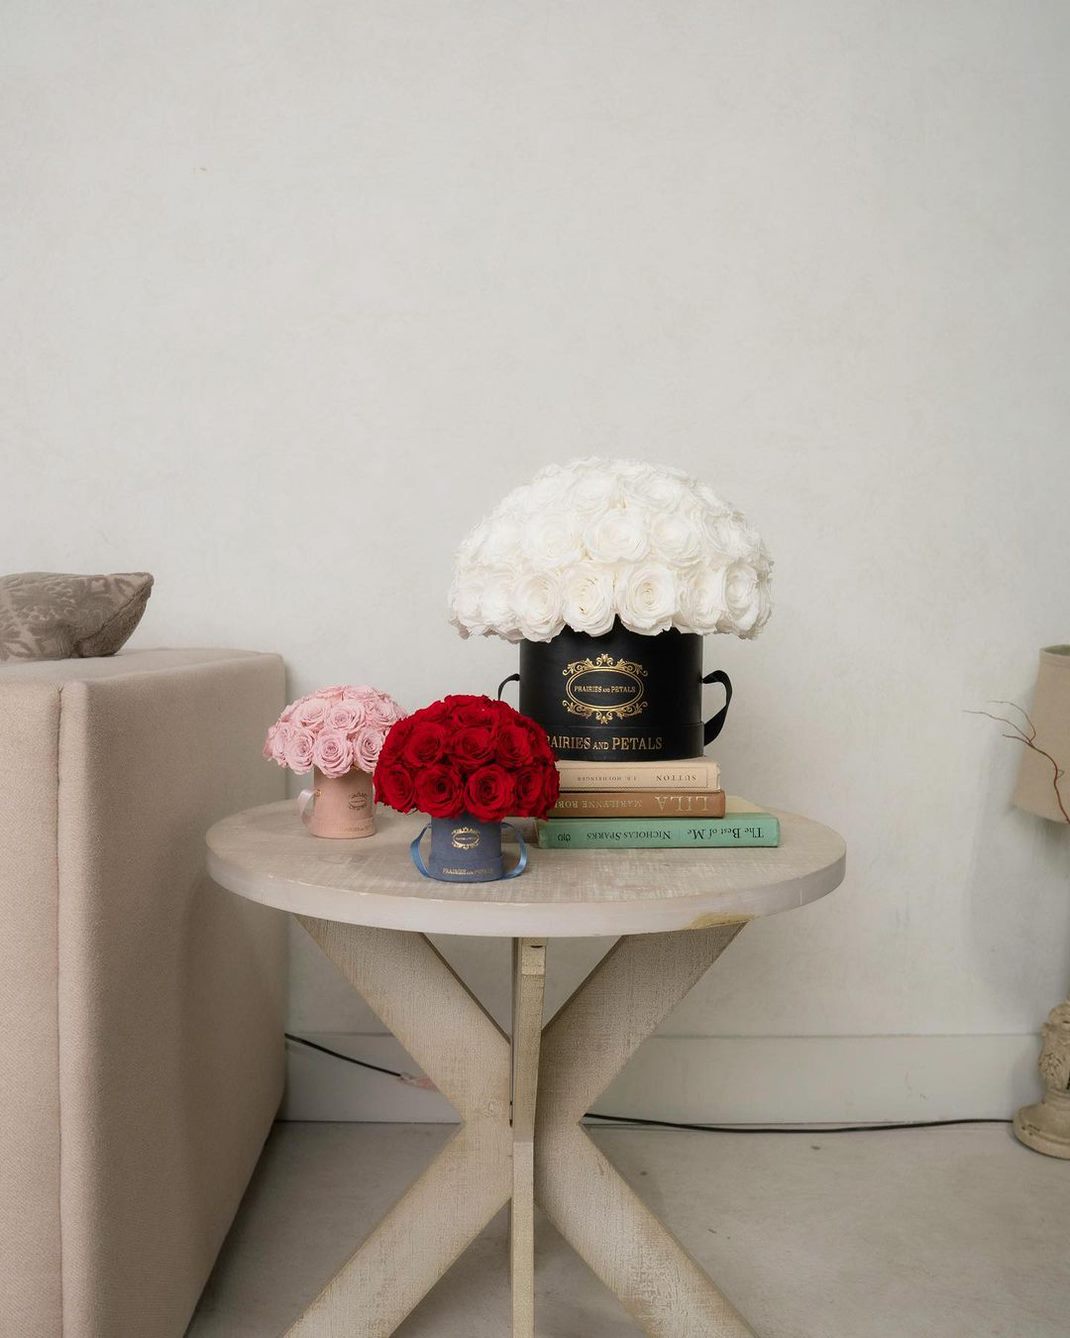 Beside a neutral-coloured couch is a similar colour three-legged table. On top of the table are three coffee table books stacked on top of each other. On the very top of the coffee table books is one of the floral arrangements in a black box with white roses. To the left is a pink box with pink roses, and to the right is a grey box with red roses.